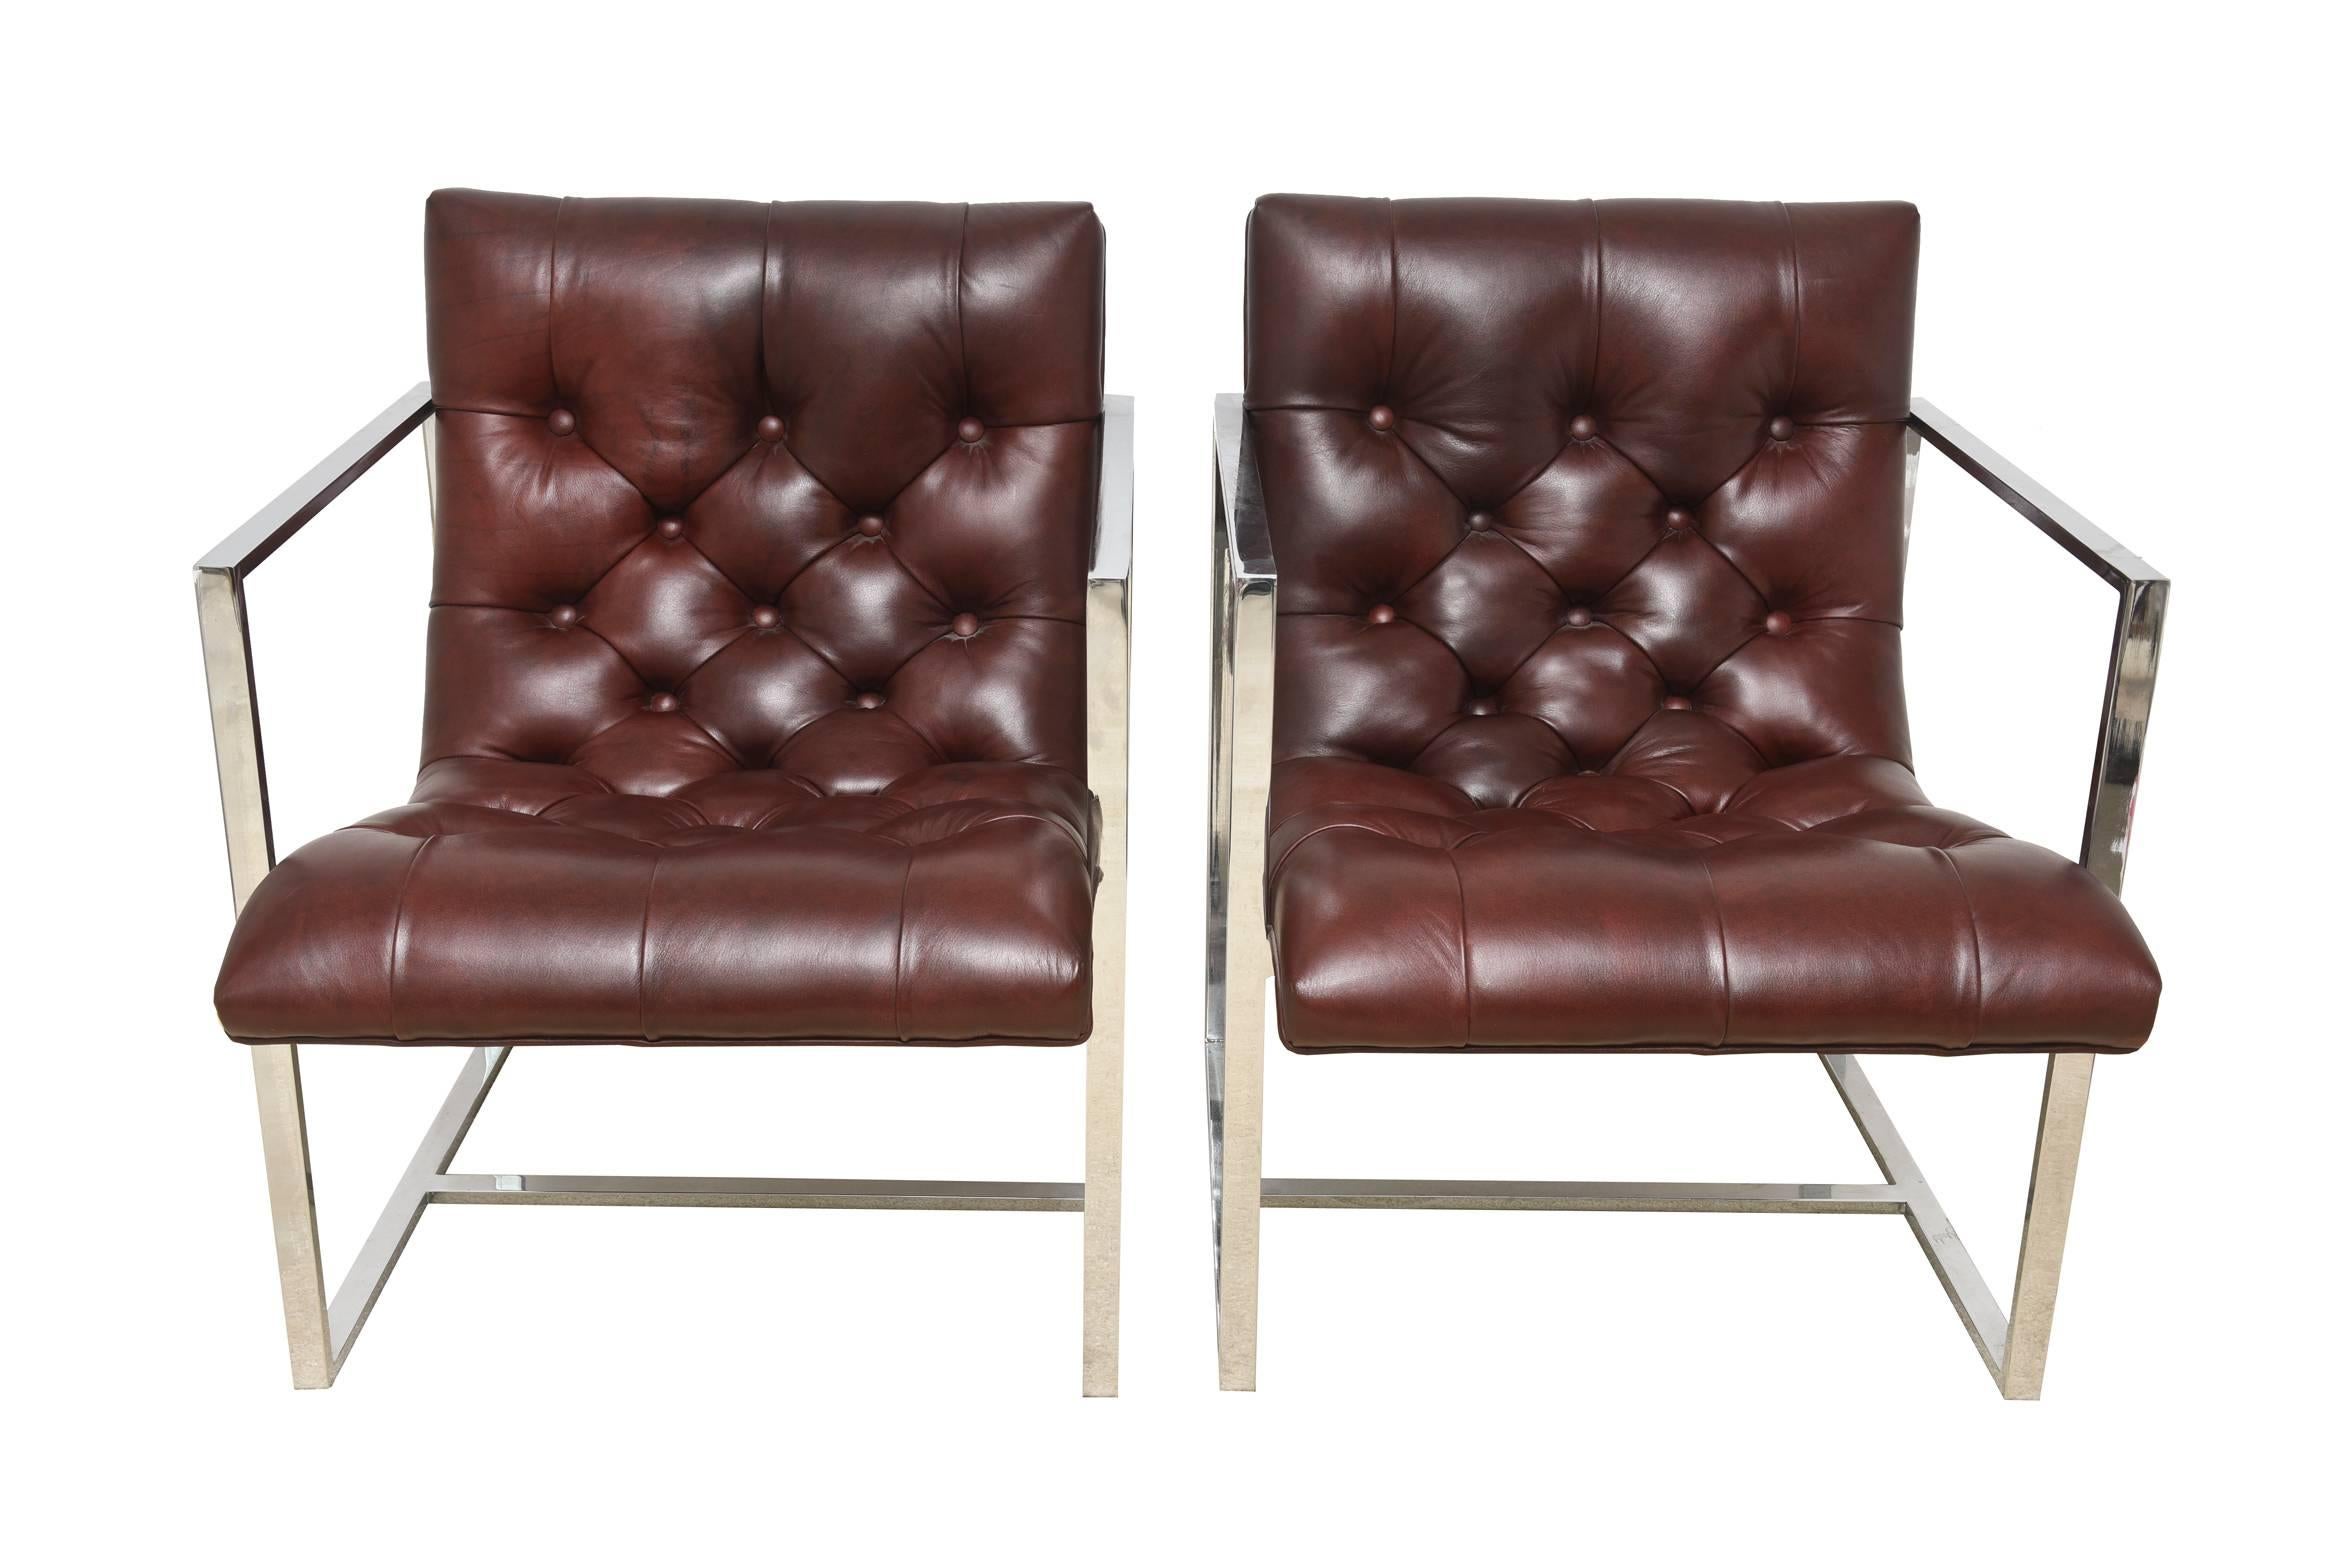 These gorgeous pair of vintage Milo Baughman attributed architectural side chairs or lounge chairs are a chrome frame with fine leather tufted seats in a brownish burgundy color. They have buttons of leather as part of the tufting. Their form is of